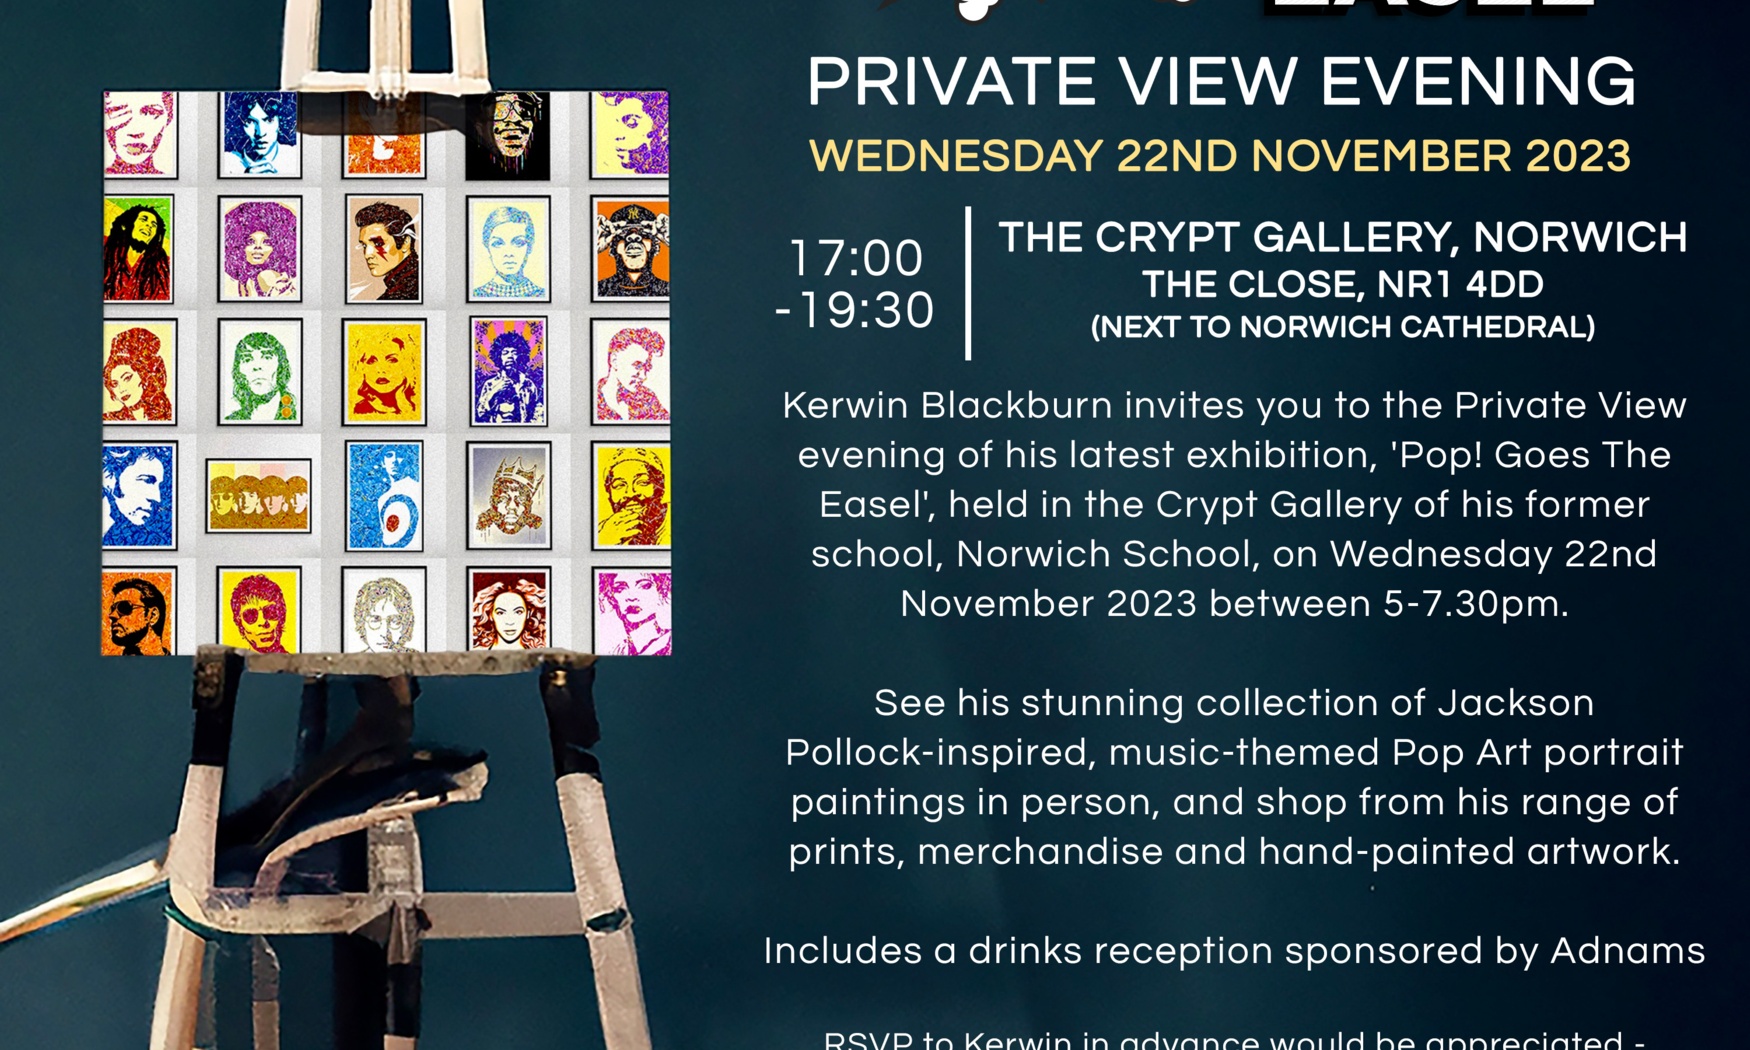 By Kerwin Private View Invite Crypt Gallery Norwich 22nd November 2023.jpg